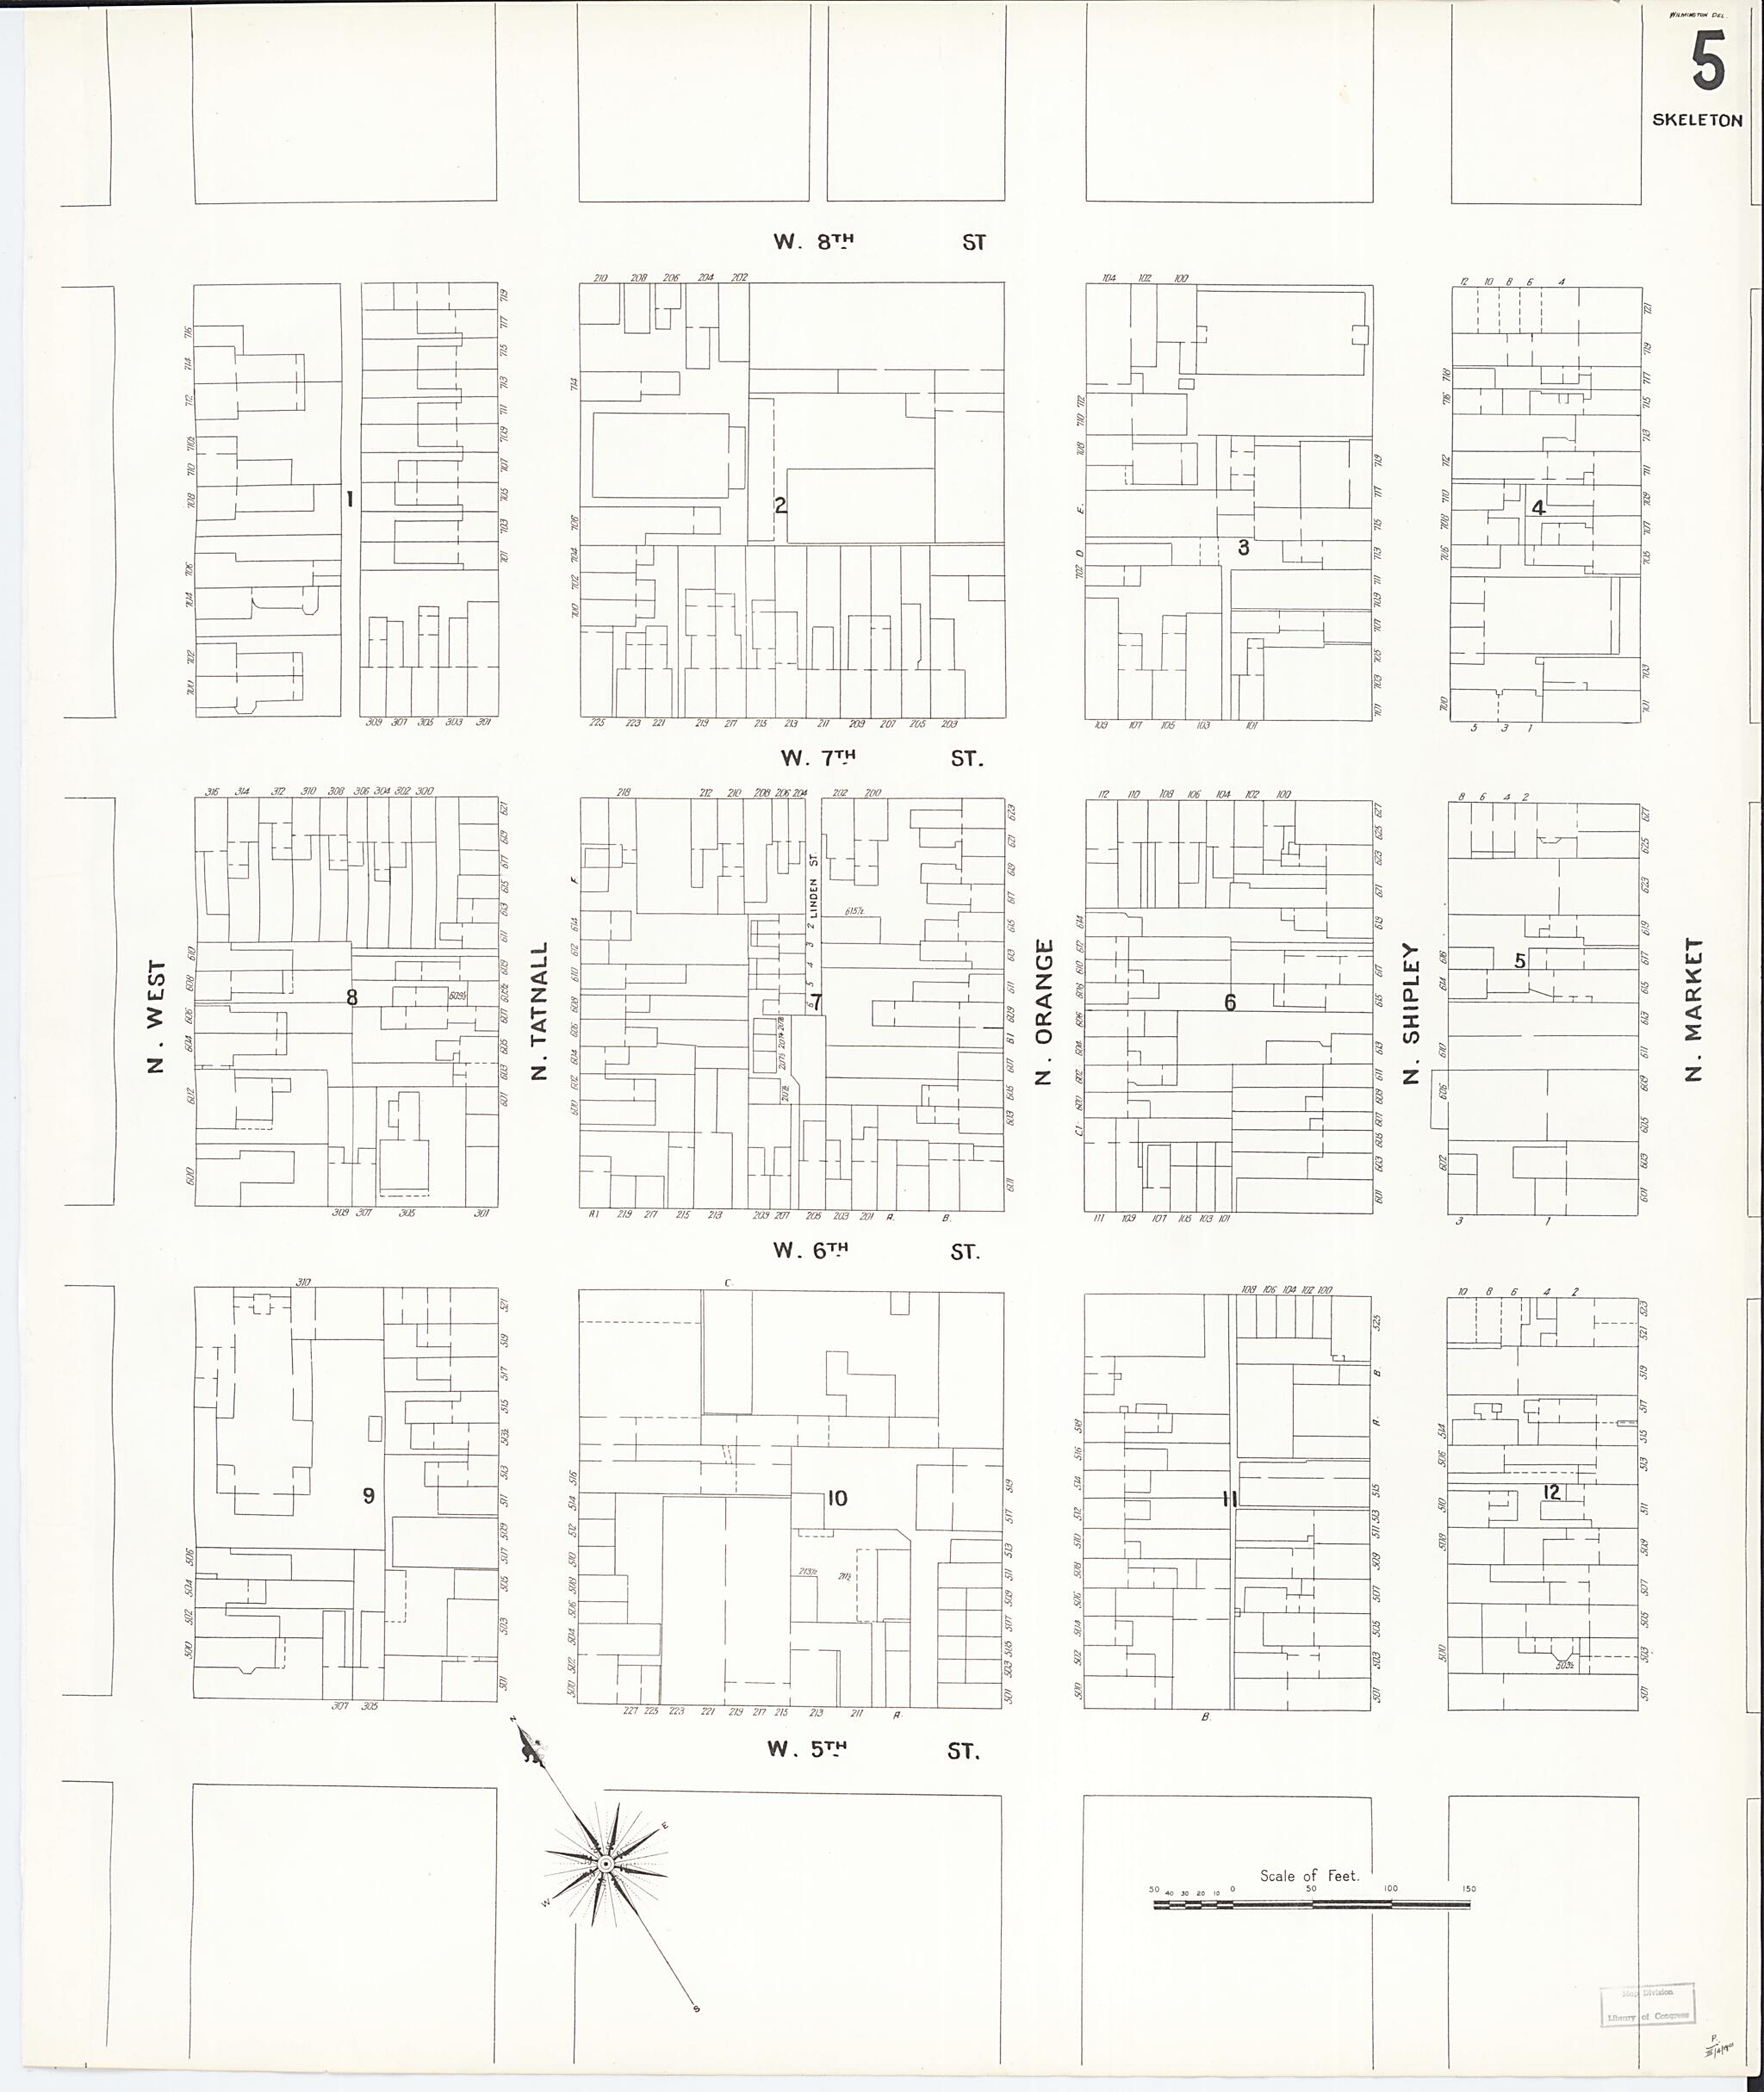 This old map of Wilmington, New Castle County, Delaware was created by Sanborn Map Company in 1901